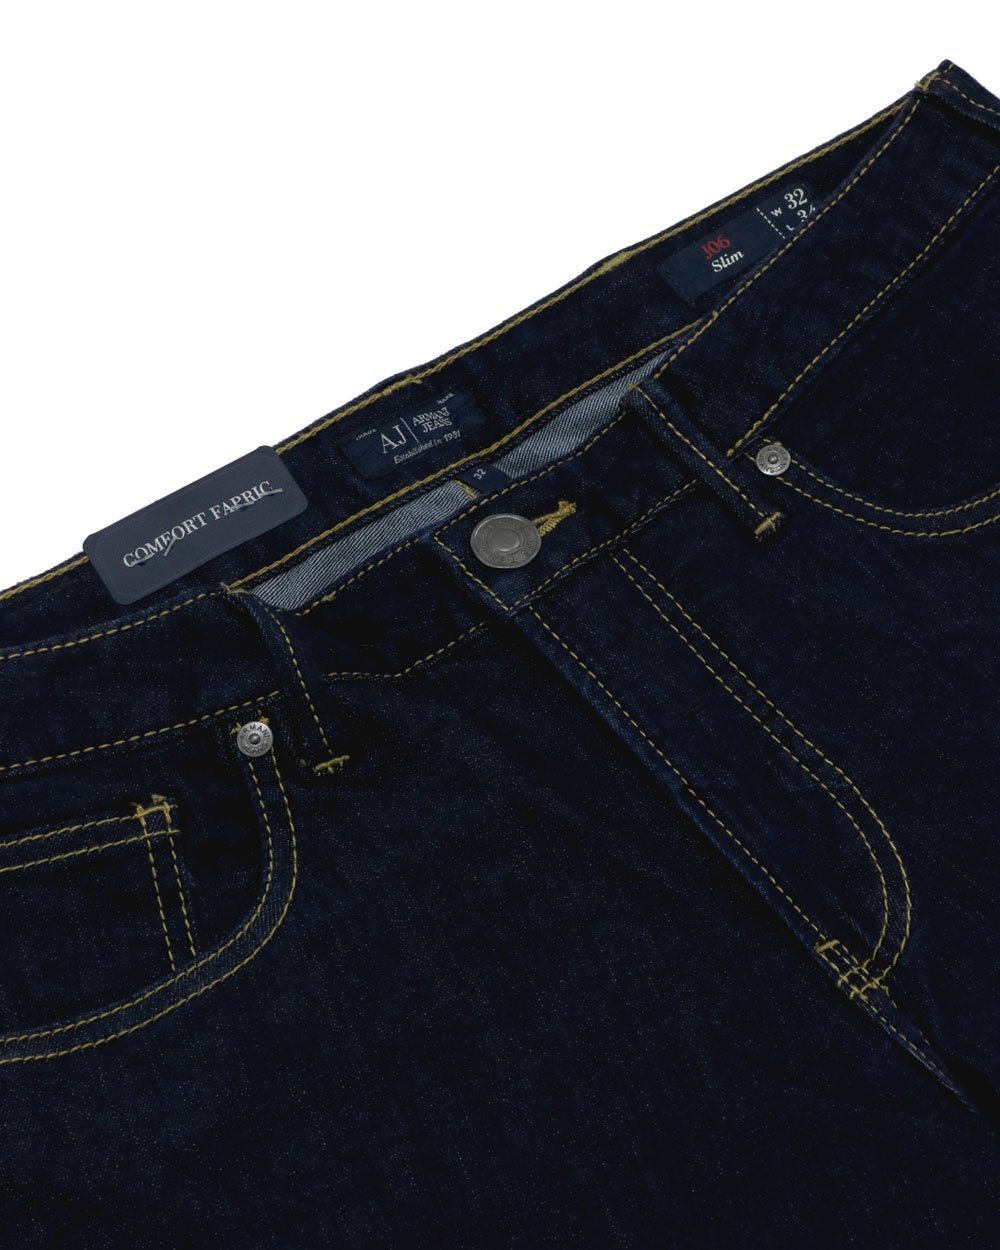 Cotton Stretch Slim Fit Jeans - ISSI Outlet